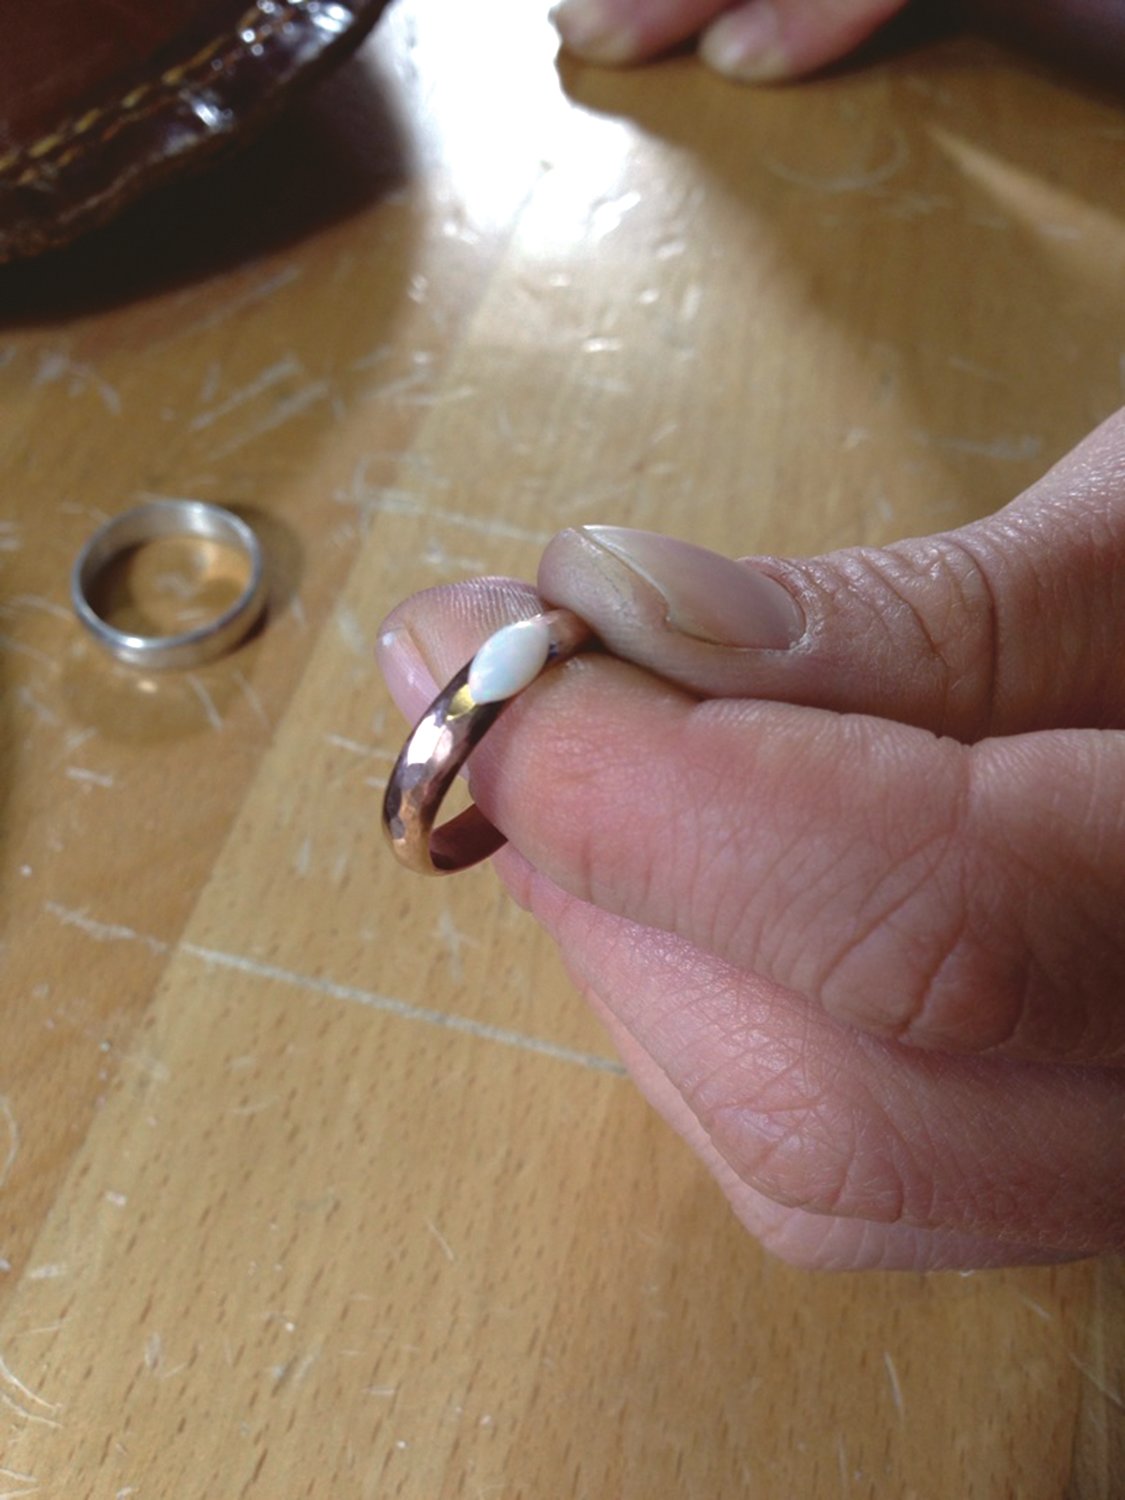 A finished ring.